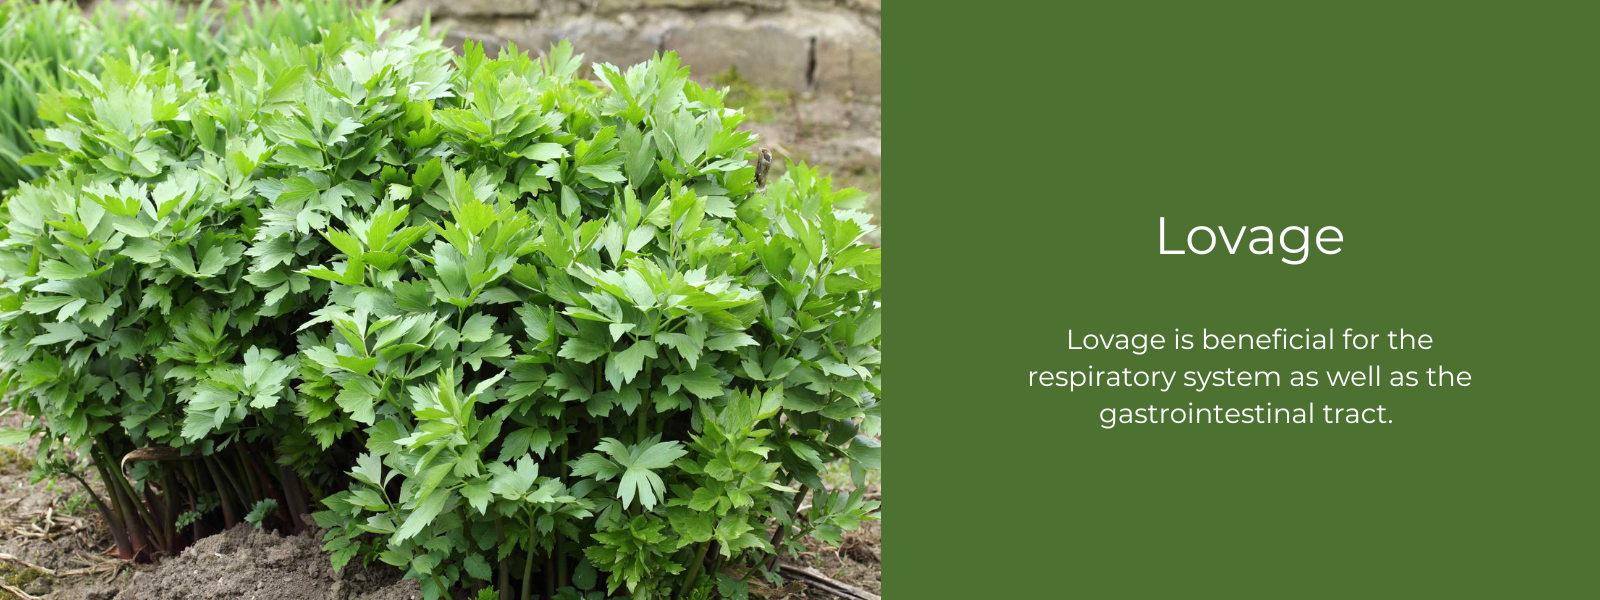 Lovage - Health Benefits, Uses and Important Facts